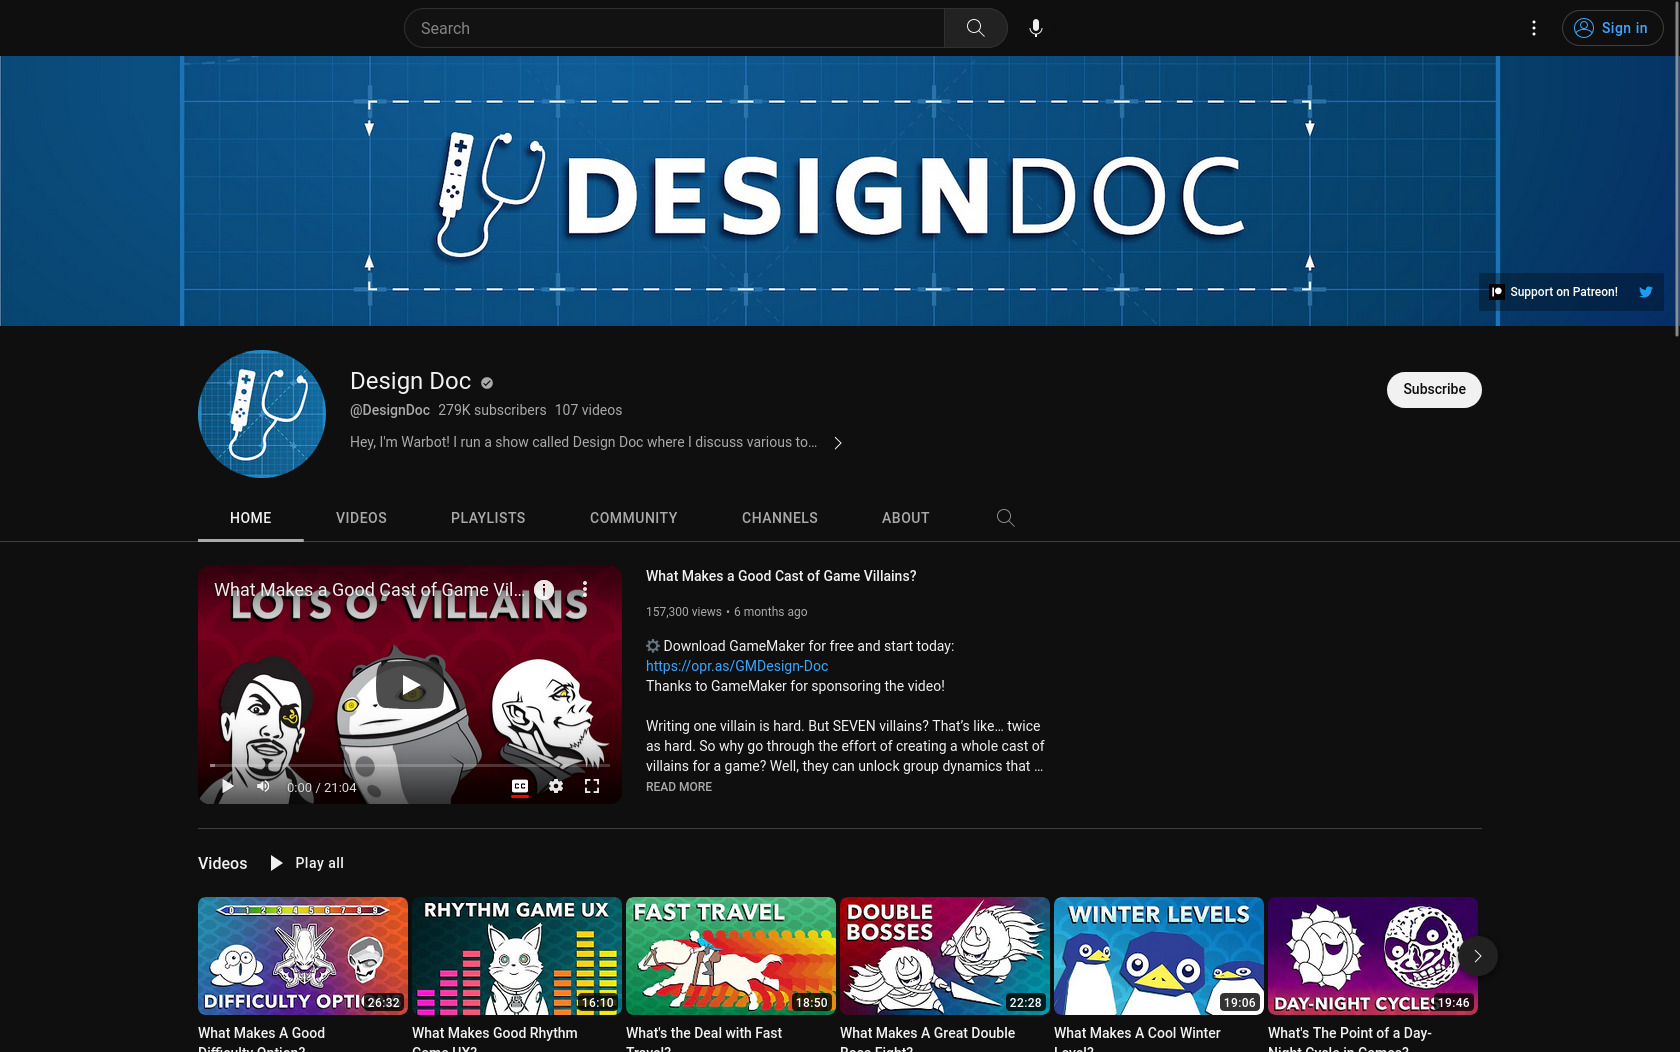 Screenshot of the Design Doc YouTube channel